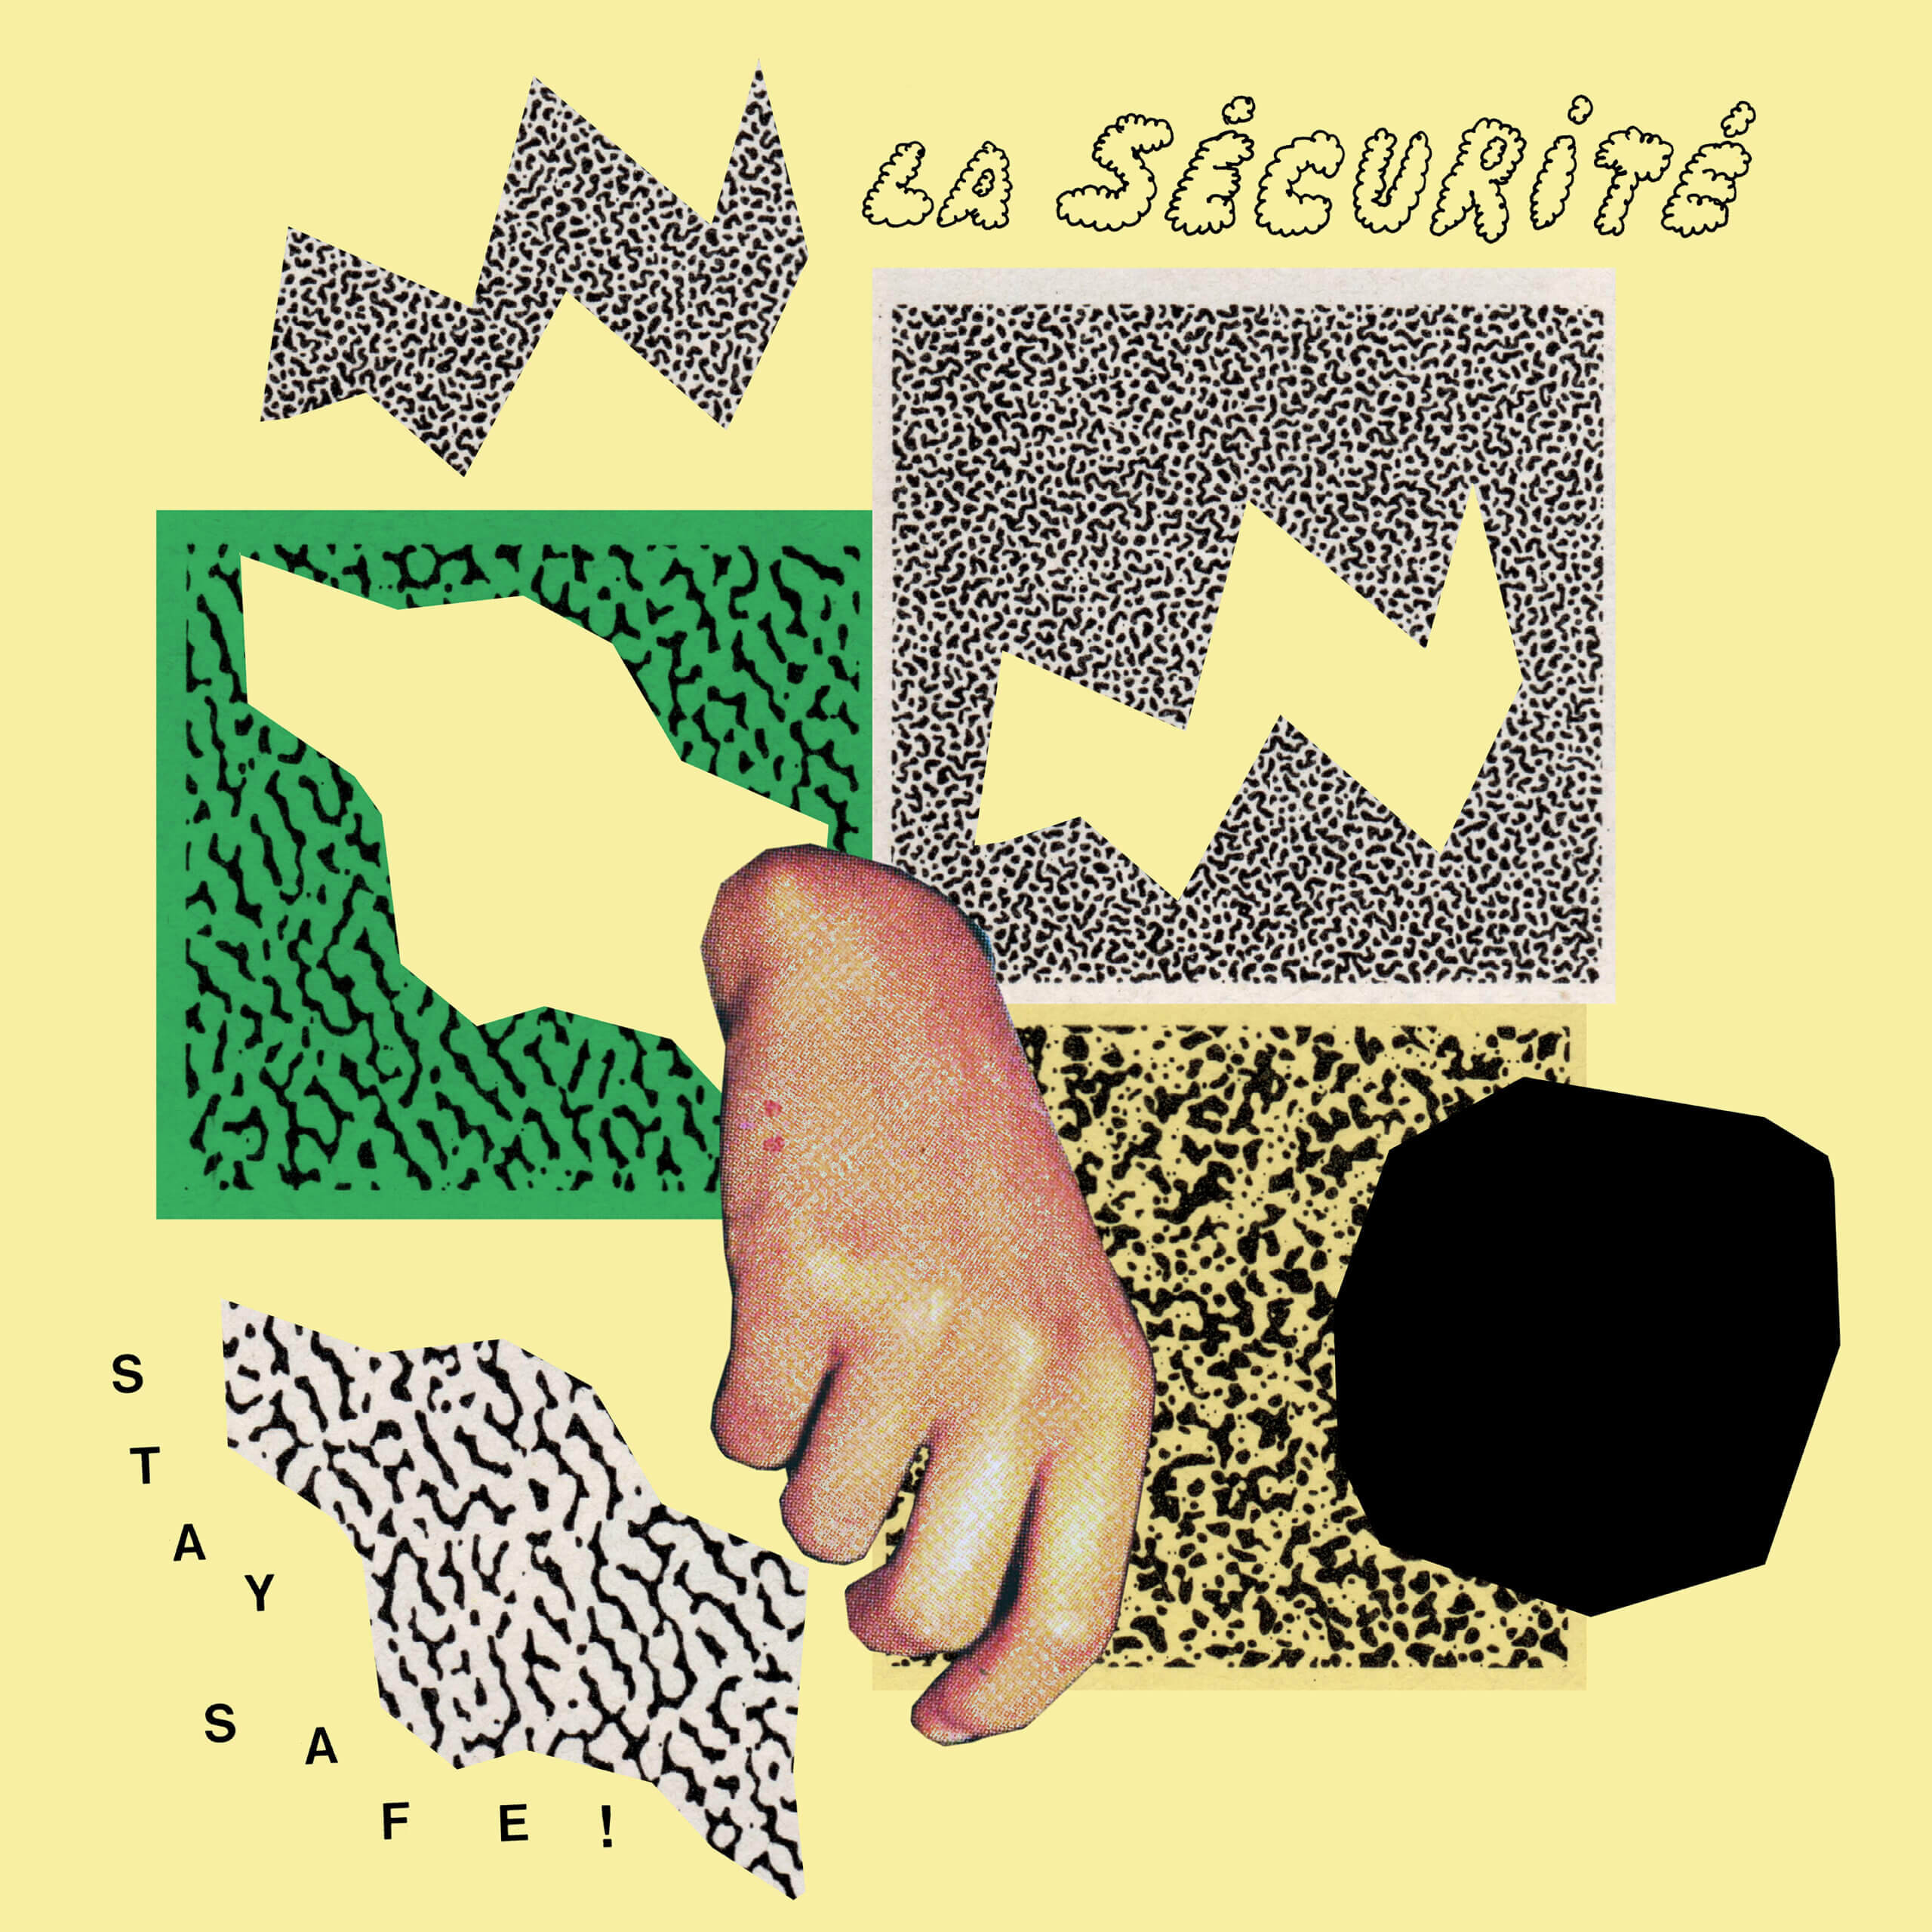 Stay Safe! by La Sécurité album review by Lauren Rosier. The Montreal band's new LP is out today via Mothland Records and DSPs